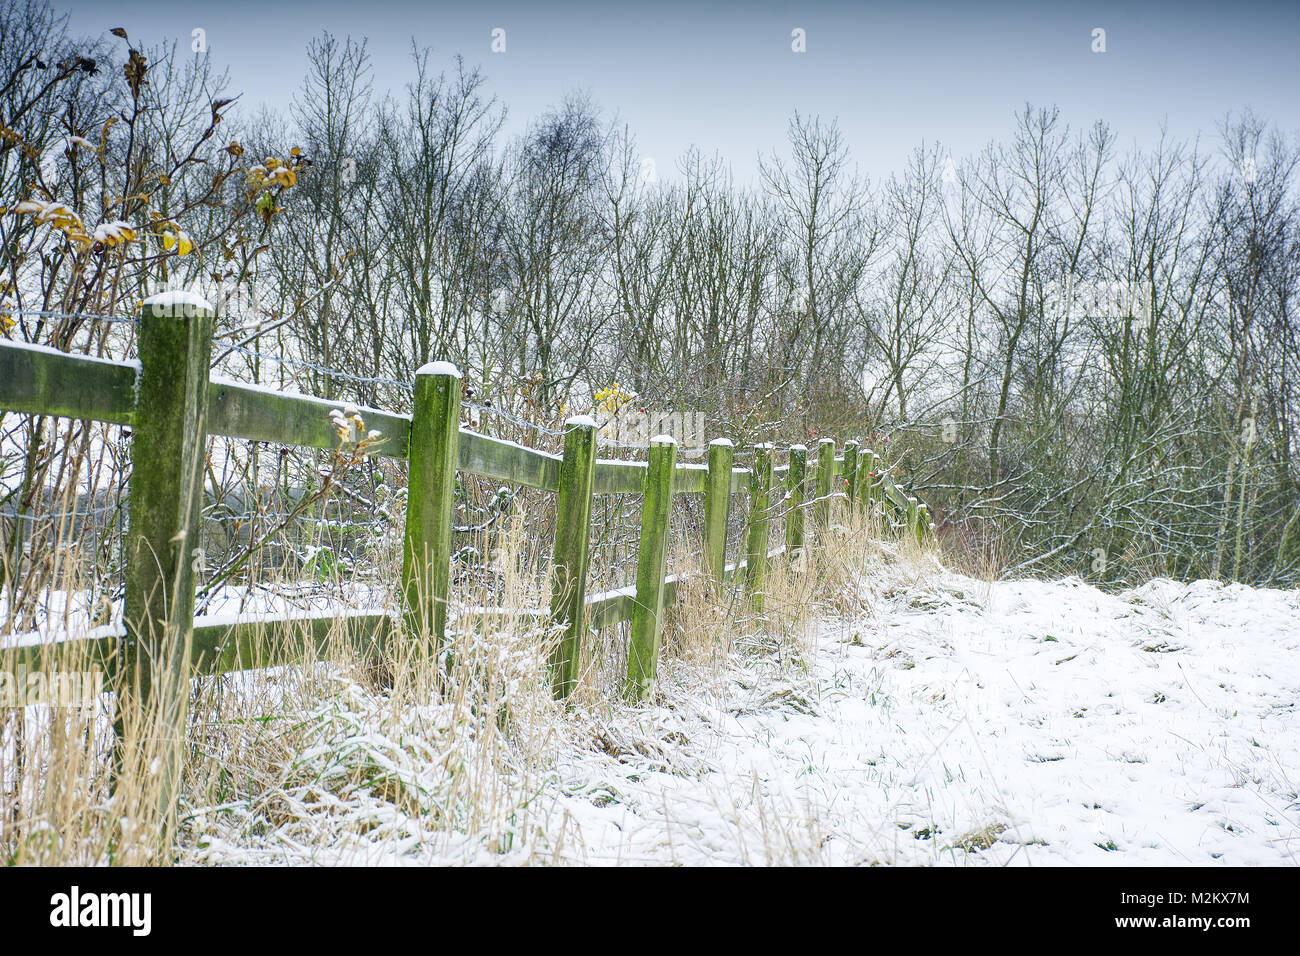 Winter scenery,field with wooden fence on British countryside covered with snow,trees in background,Stoke on Trent,Staffordshire,United Kingdom. Stock Photo